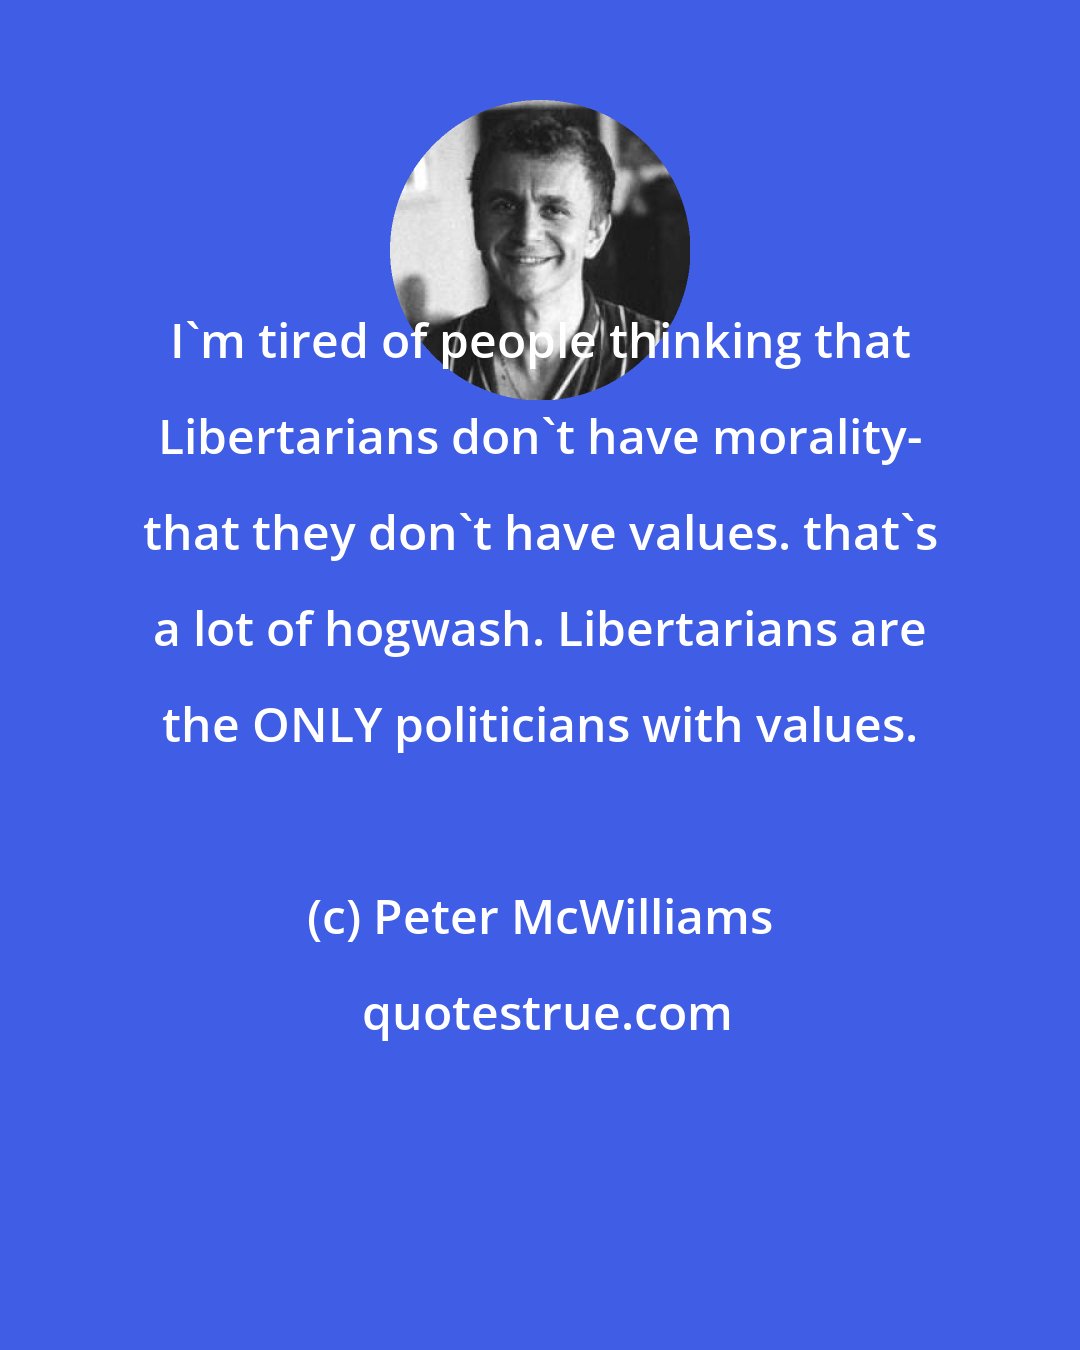 Peter McWilliams: I'm tired of people thinking that Libertarians don't have morality- that they don't have values. that's a lot of hogwash. Libertarians are the ONLY politicians with values.